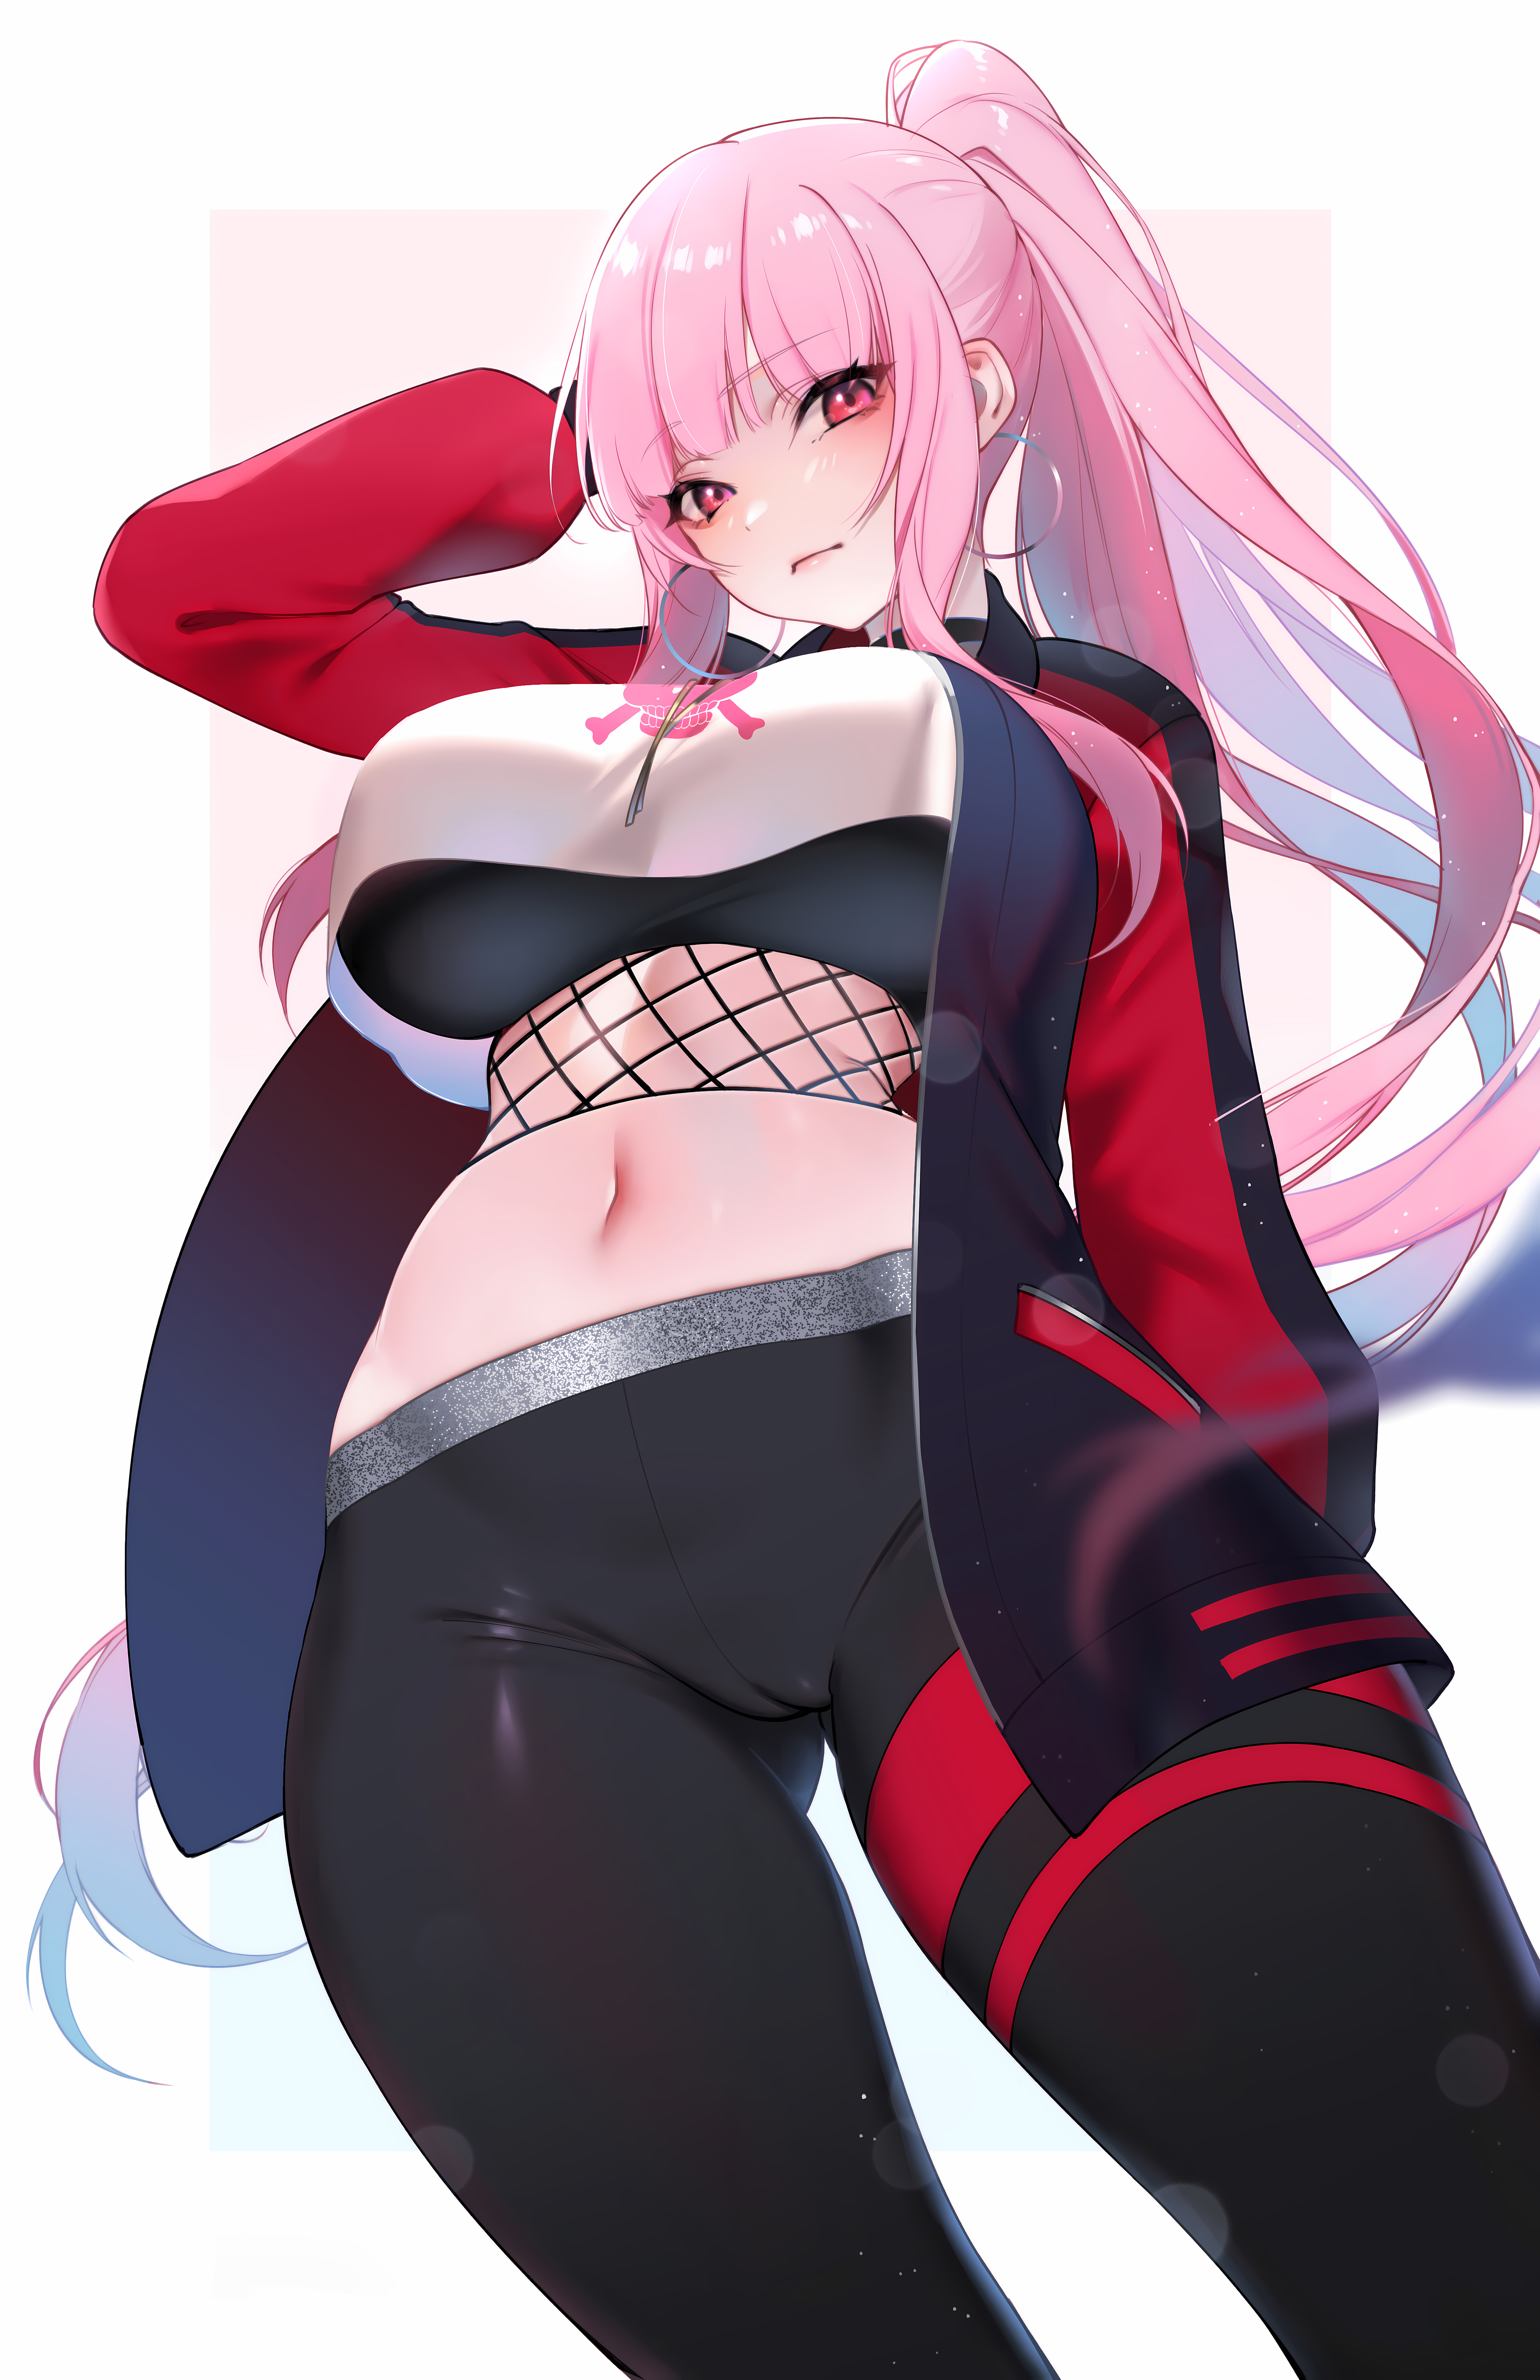 Anime 3850x5950 Hololive anime anime girls Virtual Youtuber Mori Calliope belly pink hair pink eyes earring ponytail